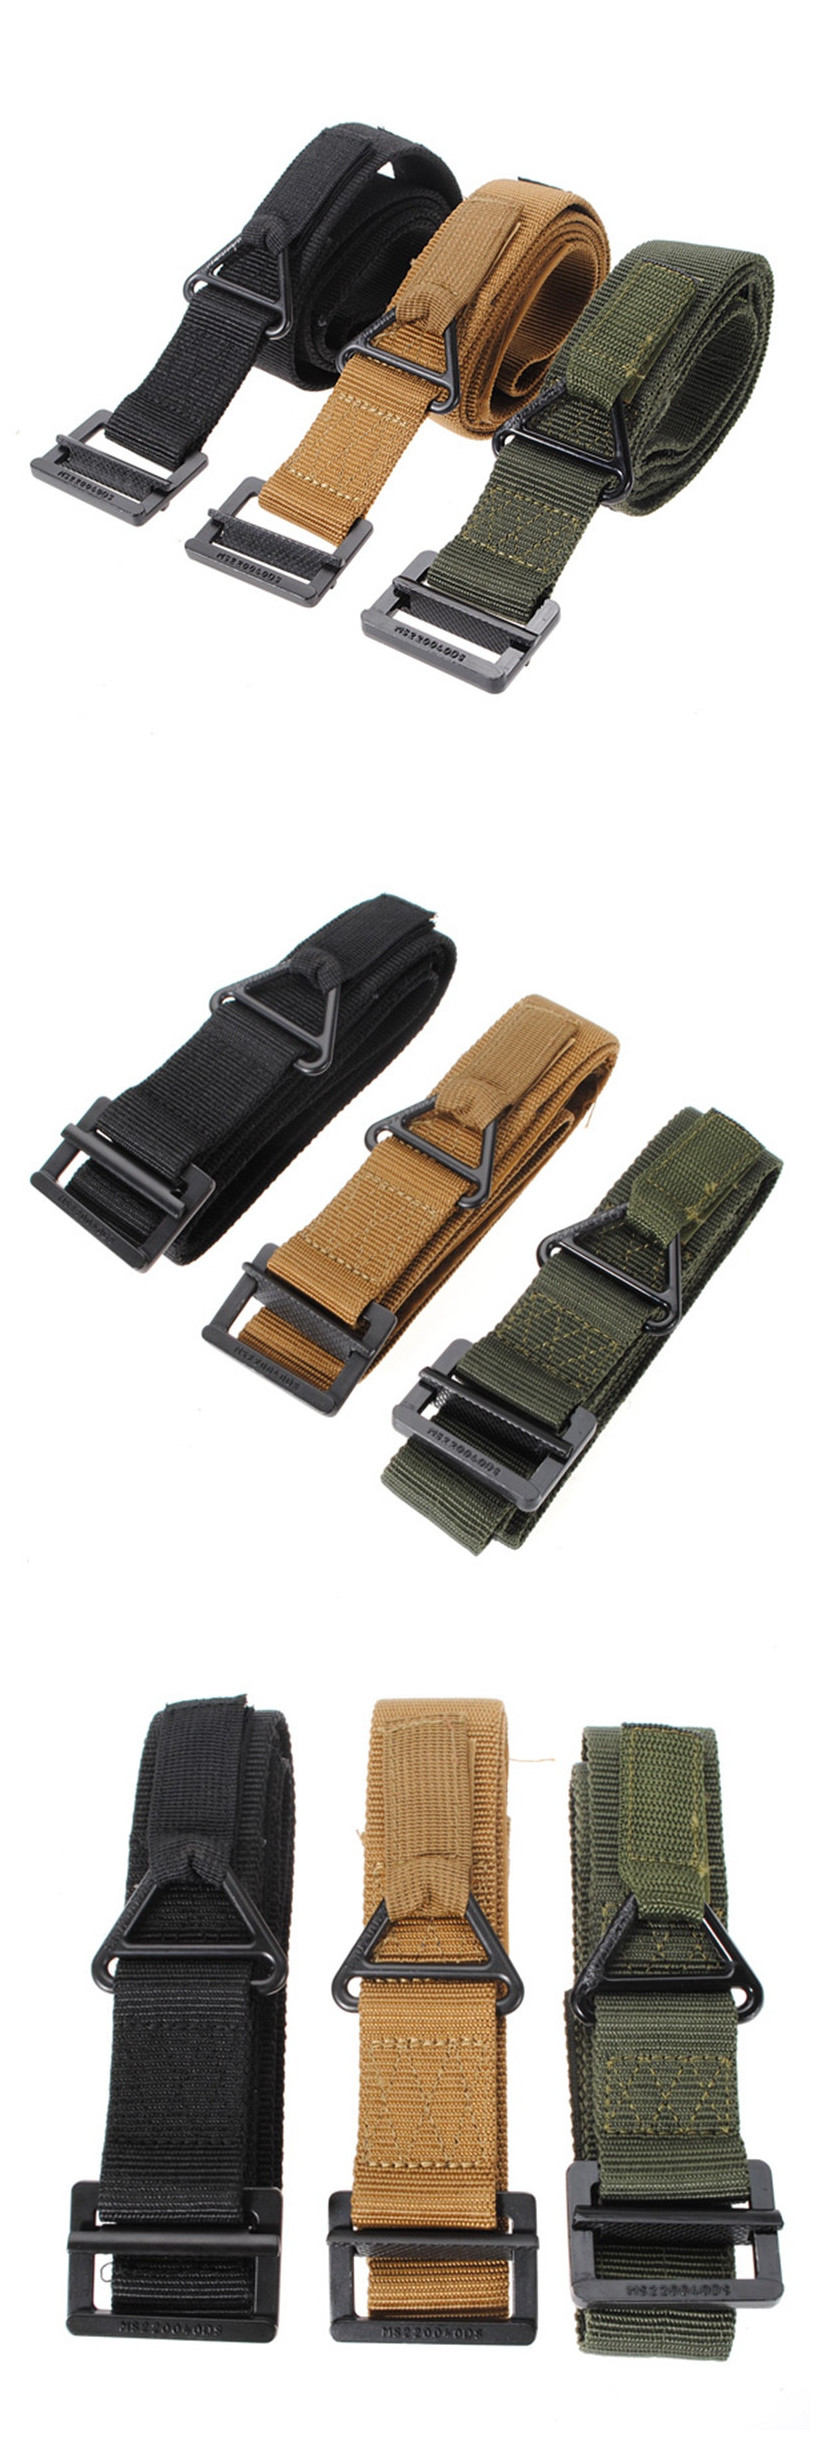 KALOAD-Survival-Tactical-Waist-Belt-Strap-Military-Emergency-Rescue-Protection-Waistband-For-Hunting-62888-1